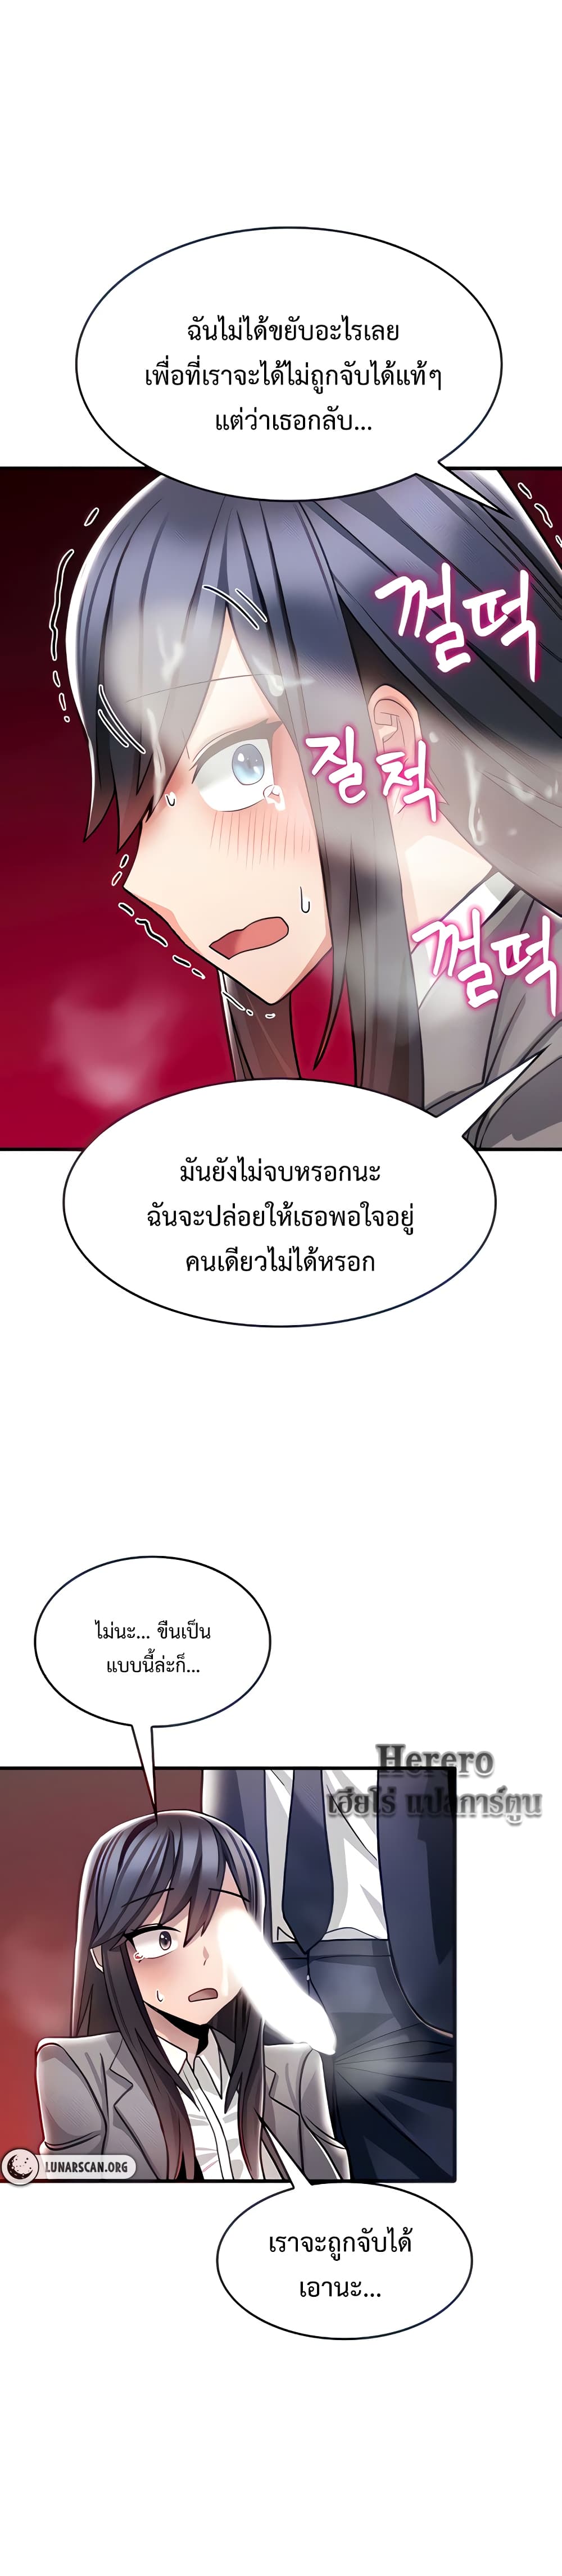 Relationship Reverse Button: Let’s Make Her Submissive 5 ภาพที่ 7